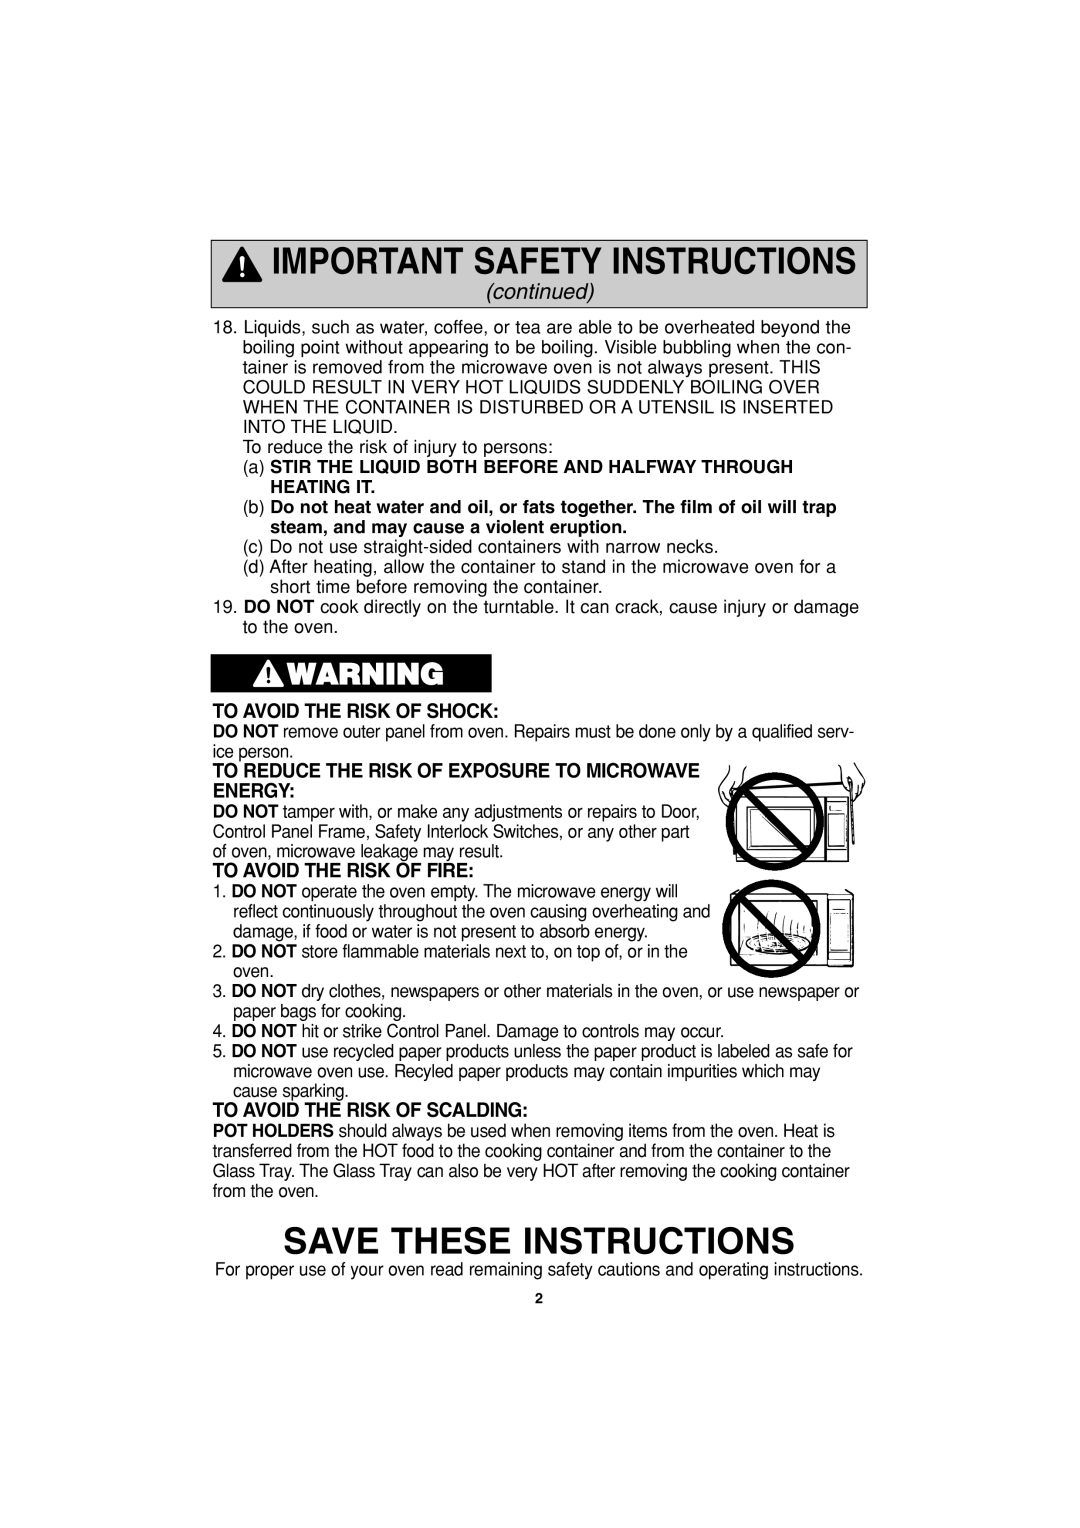 Panasonic NN-S423 Save These Instructions, continued, To Avoid The Risk Of Shock, To Avoid The Risk Of Fire 